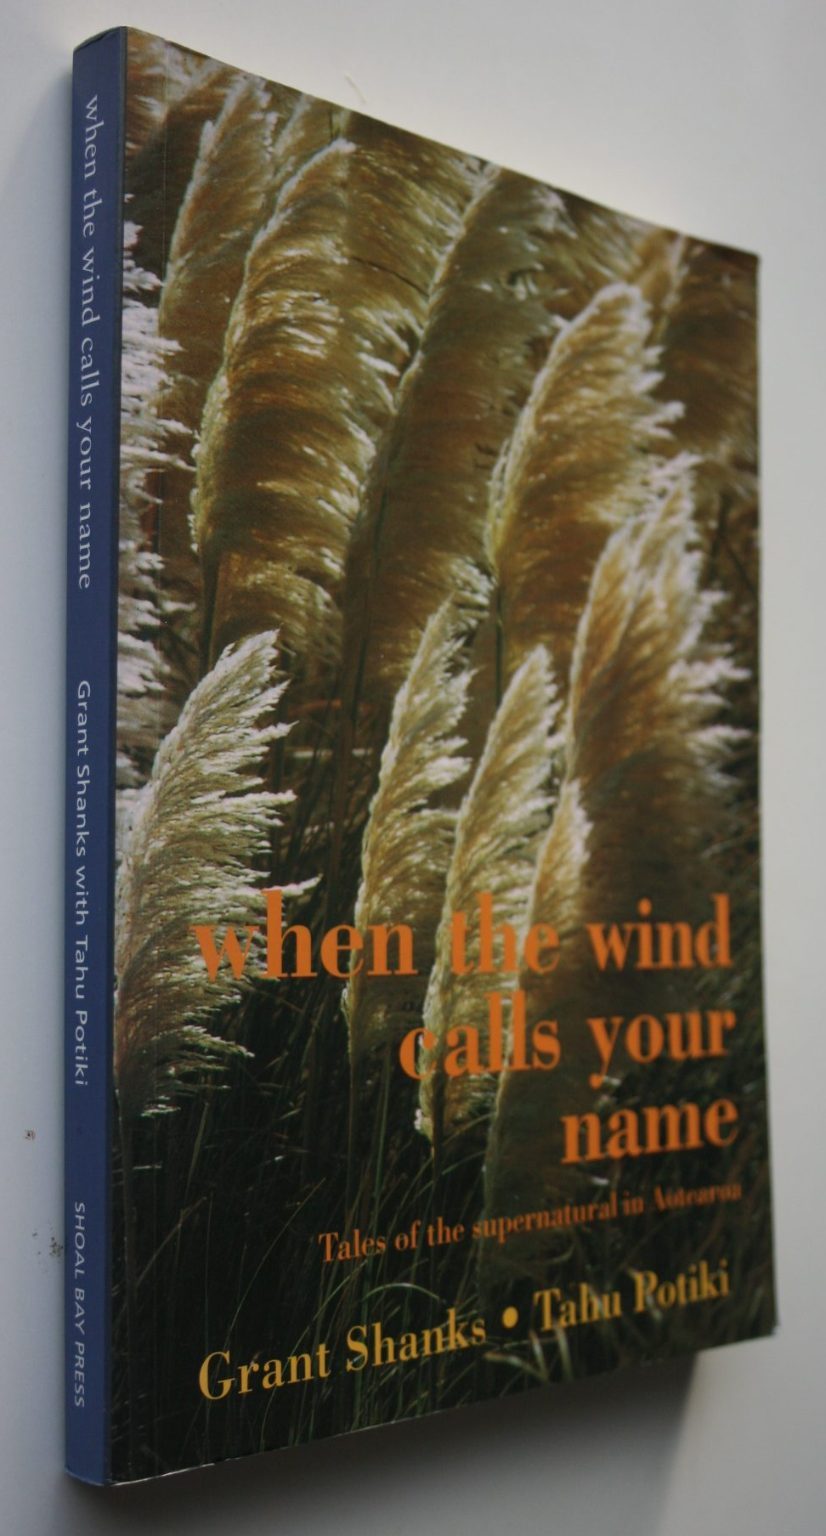 When the Wind Calls Your Name - Tales of the Supernatural in Aotearoa by Grant Shanks; Tahu Potiki. SCARCE